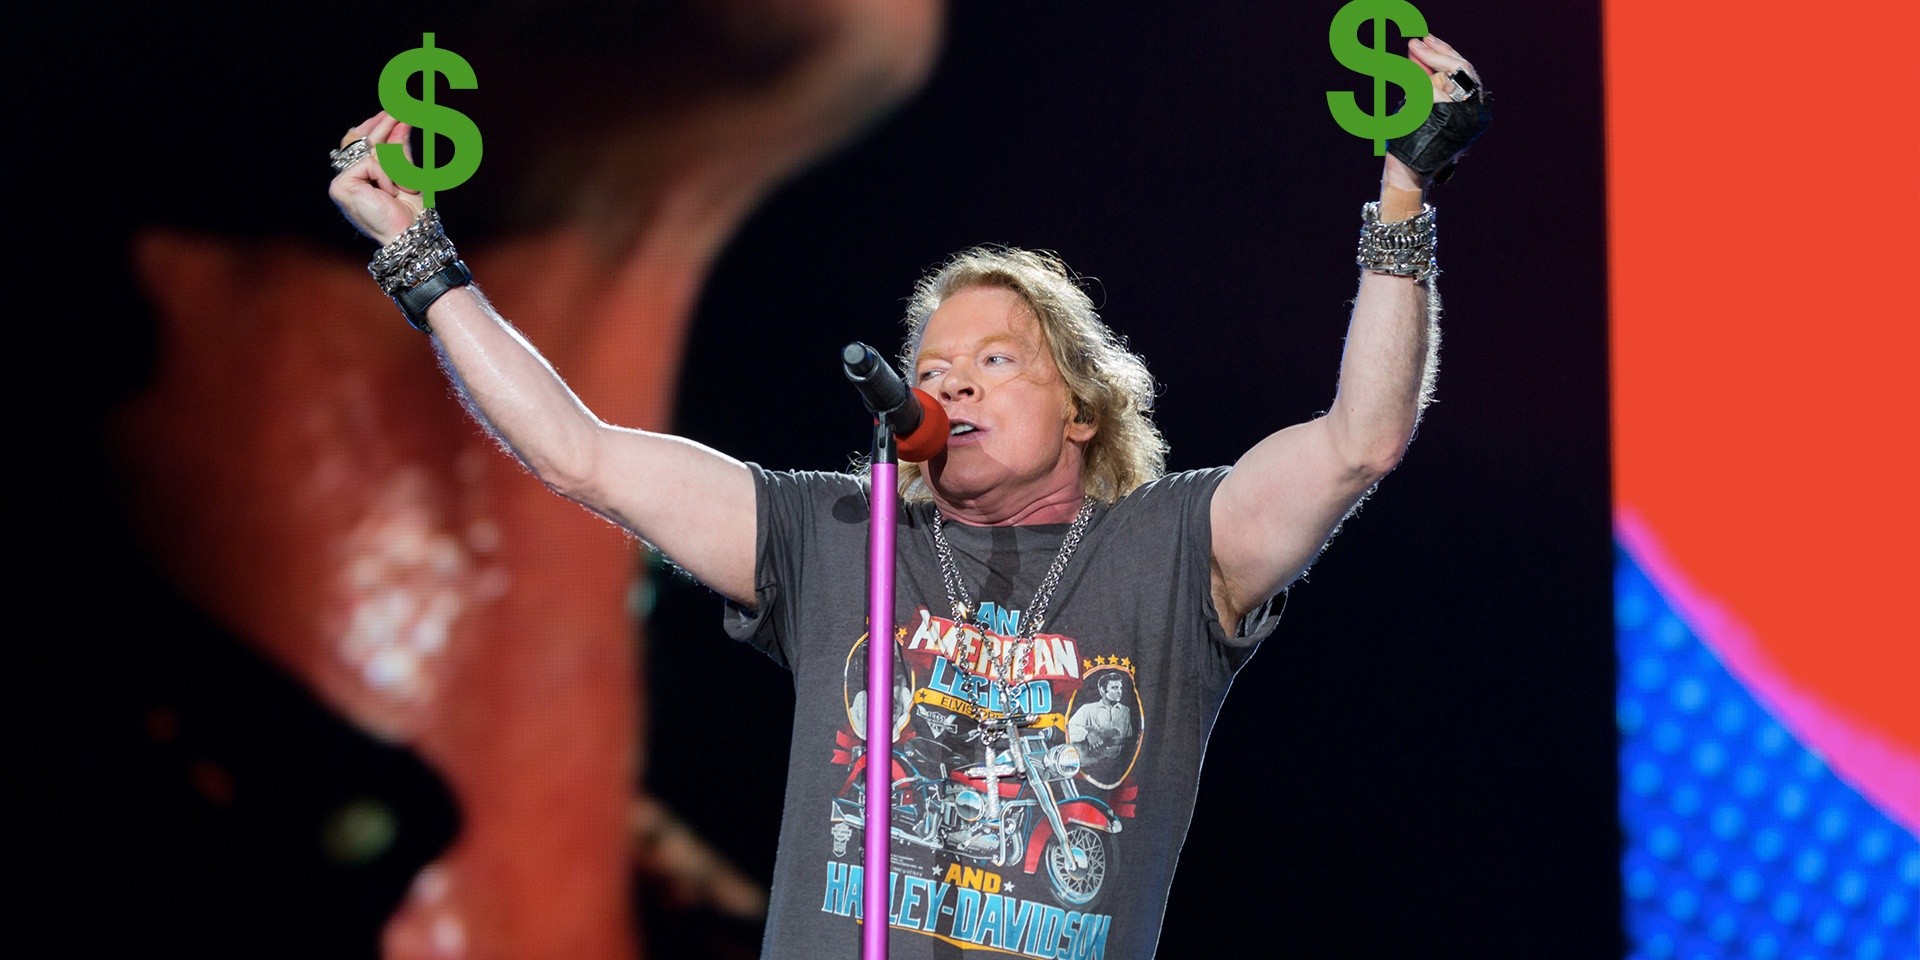 Guns N' Roses RFID refunds now available for collection